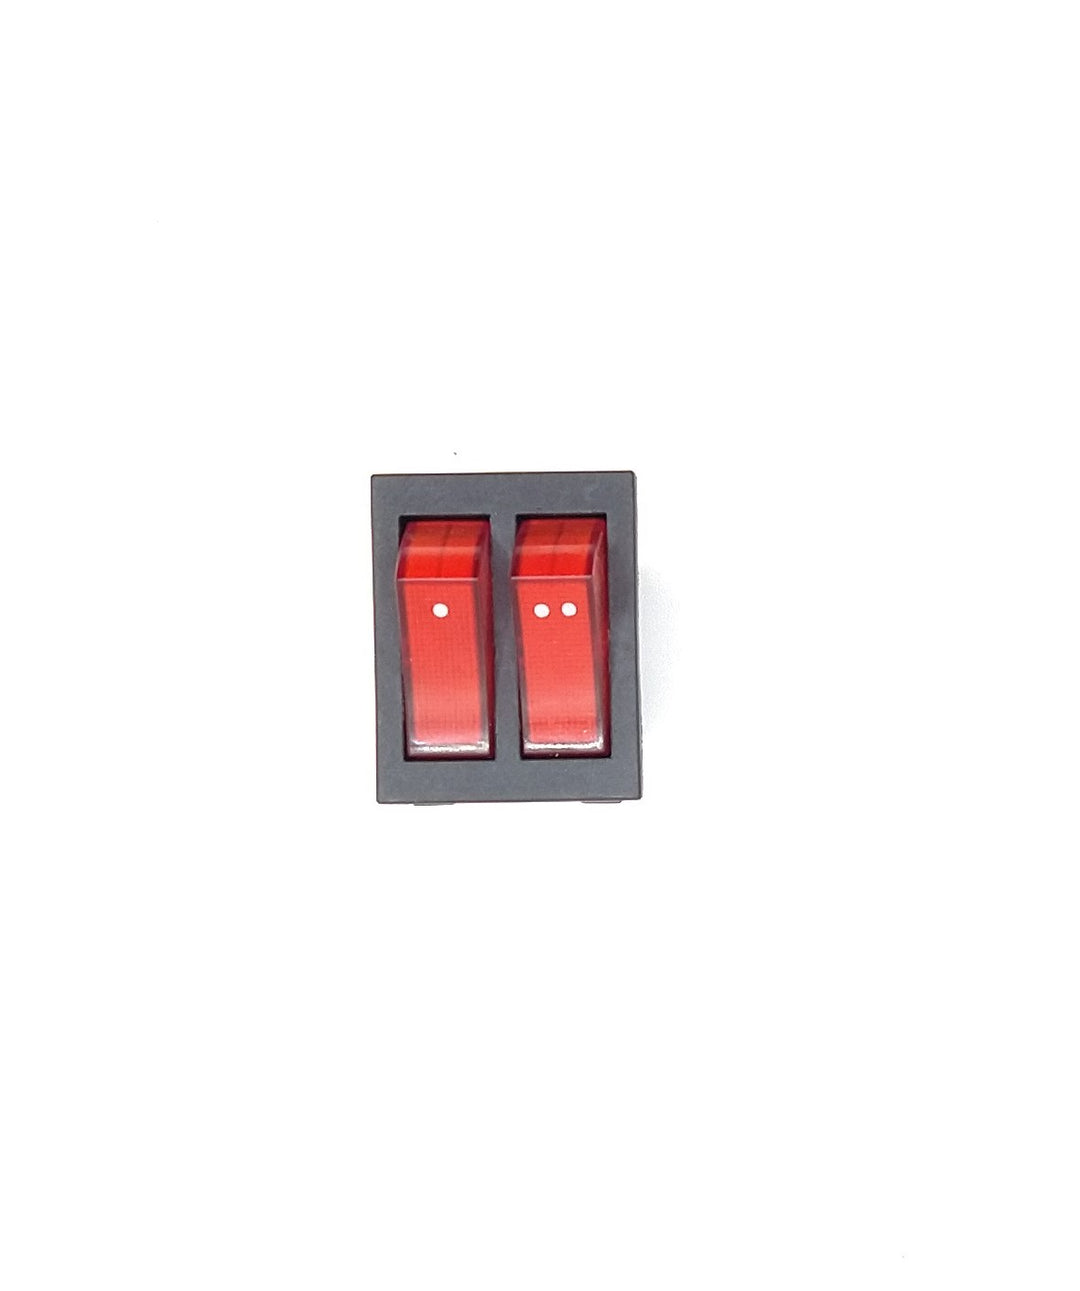 DOUBLE SWITCH FOR EUROLUX HOT WATER URNS EUR30-31-40-41-65-100